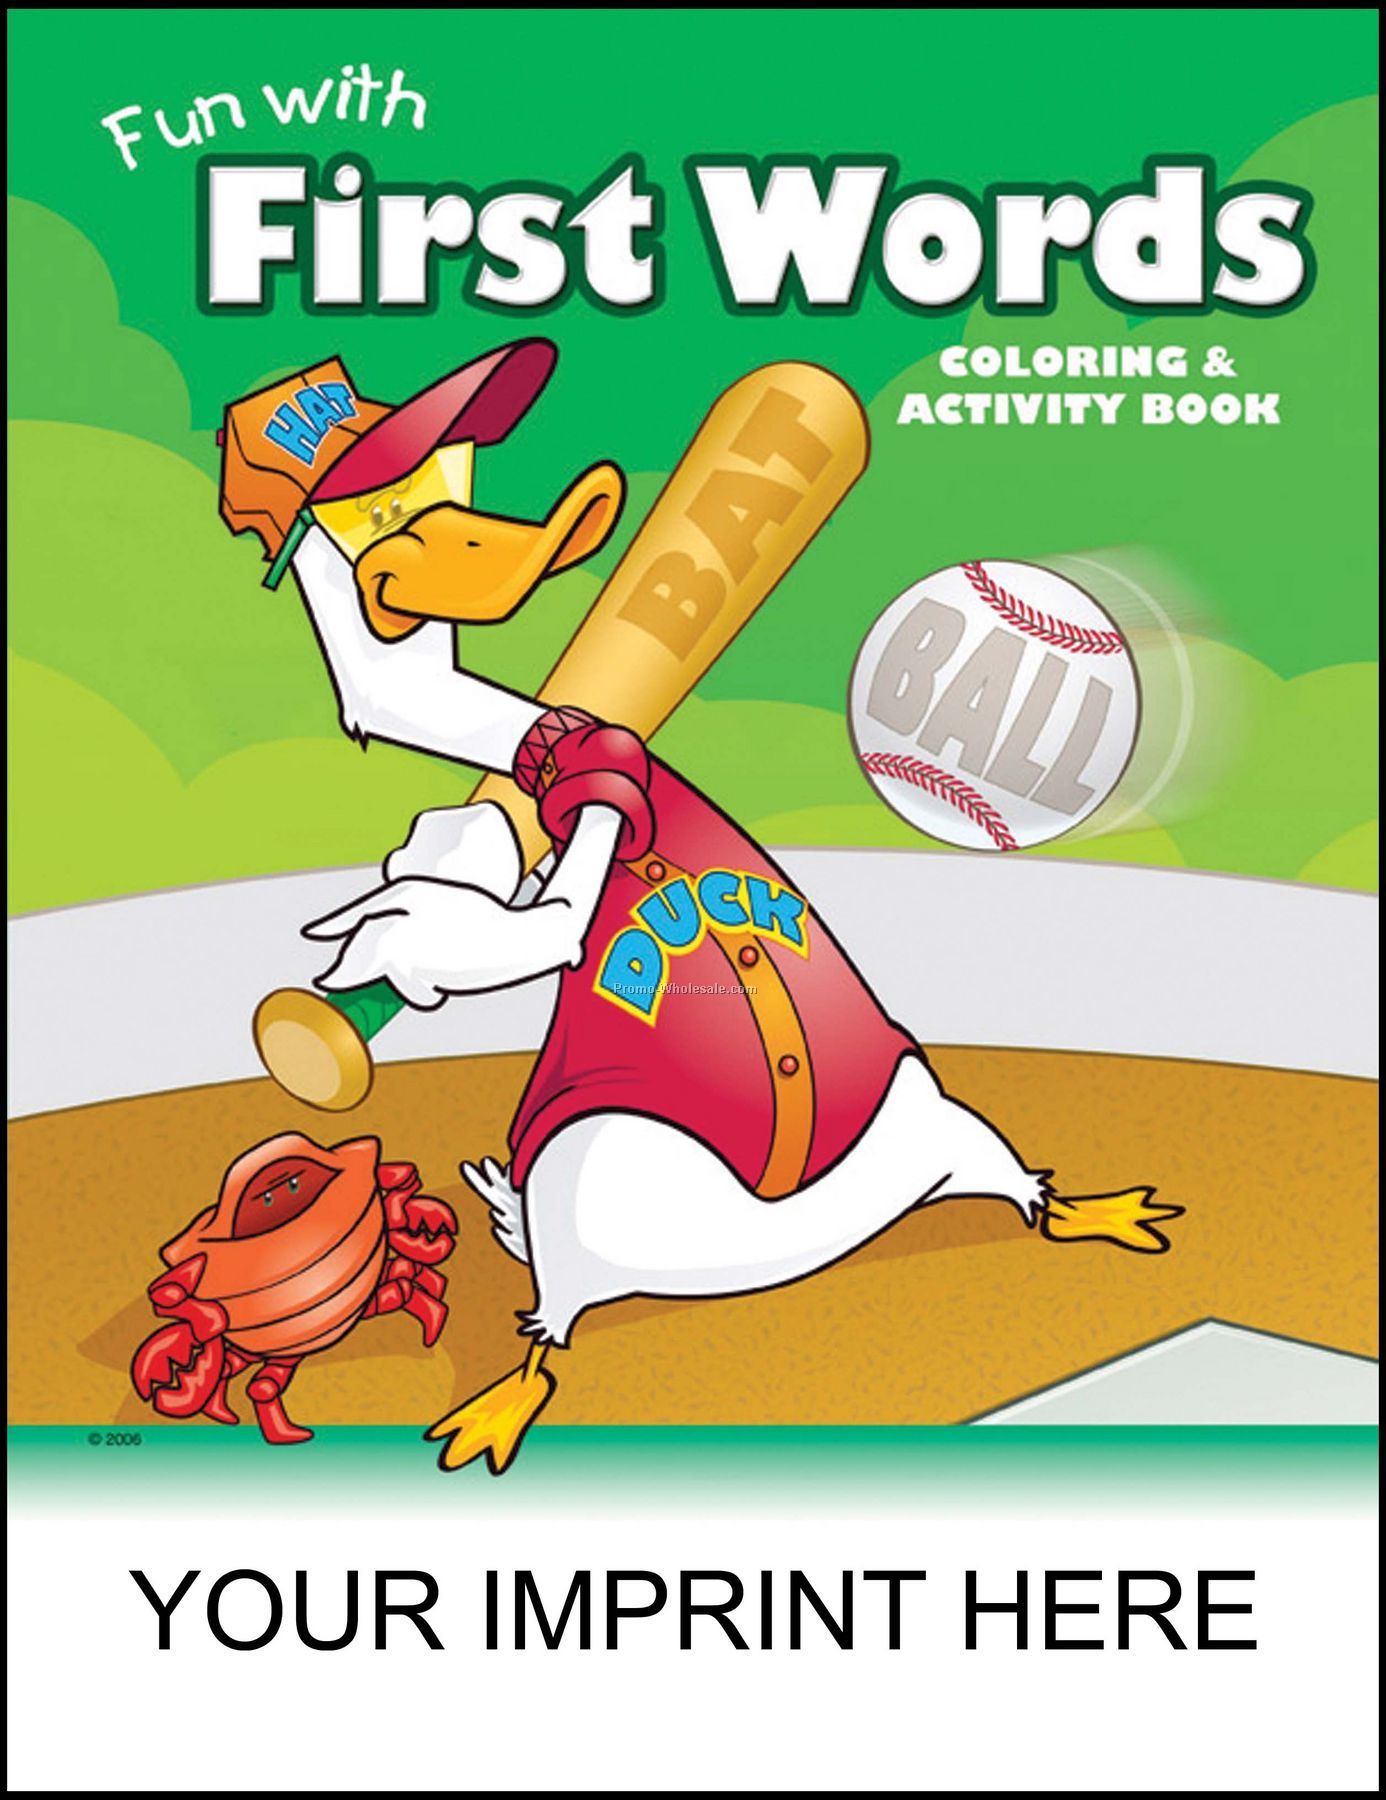 8-3/8"x10-7/8" Fun With First Words Coloring & Activity Book